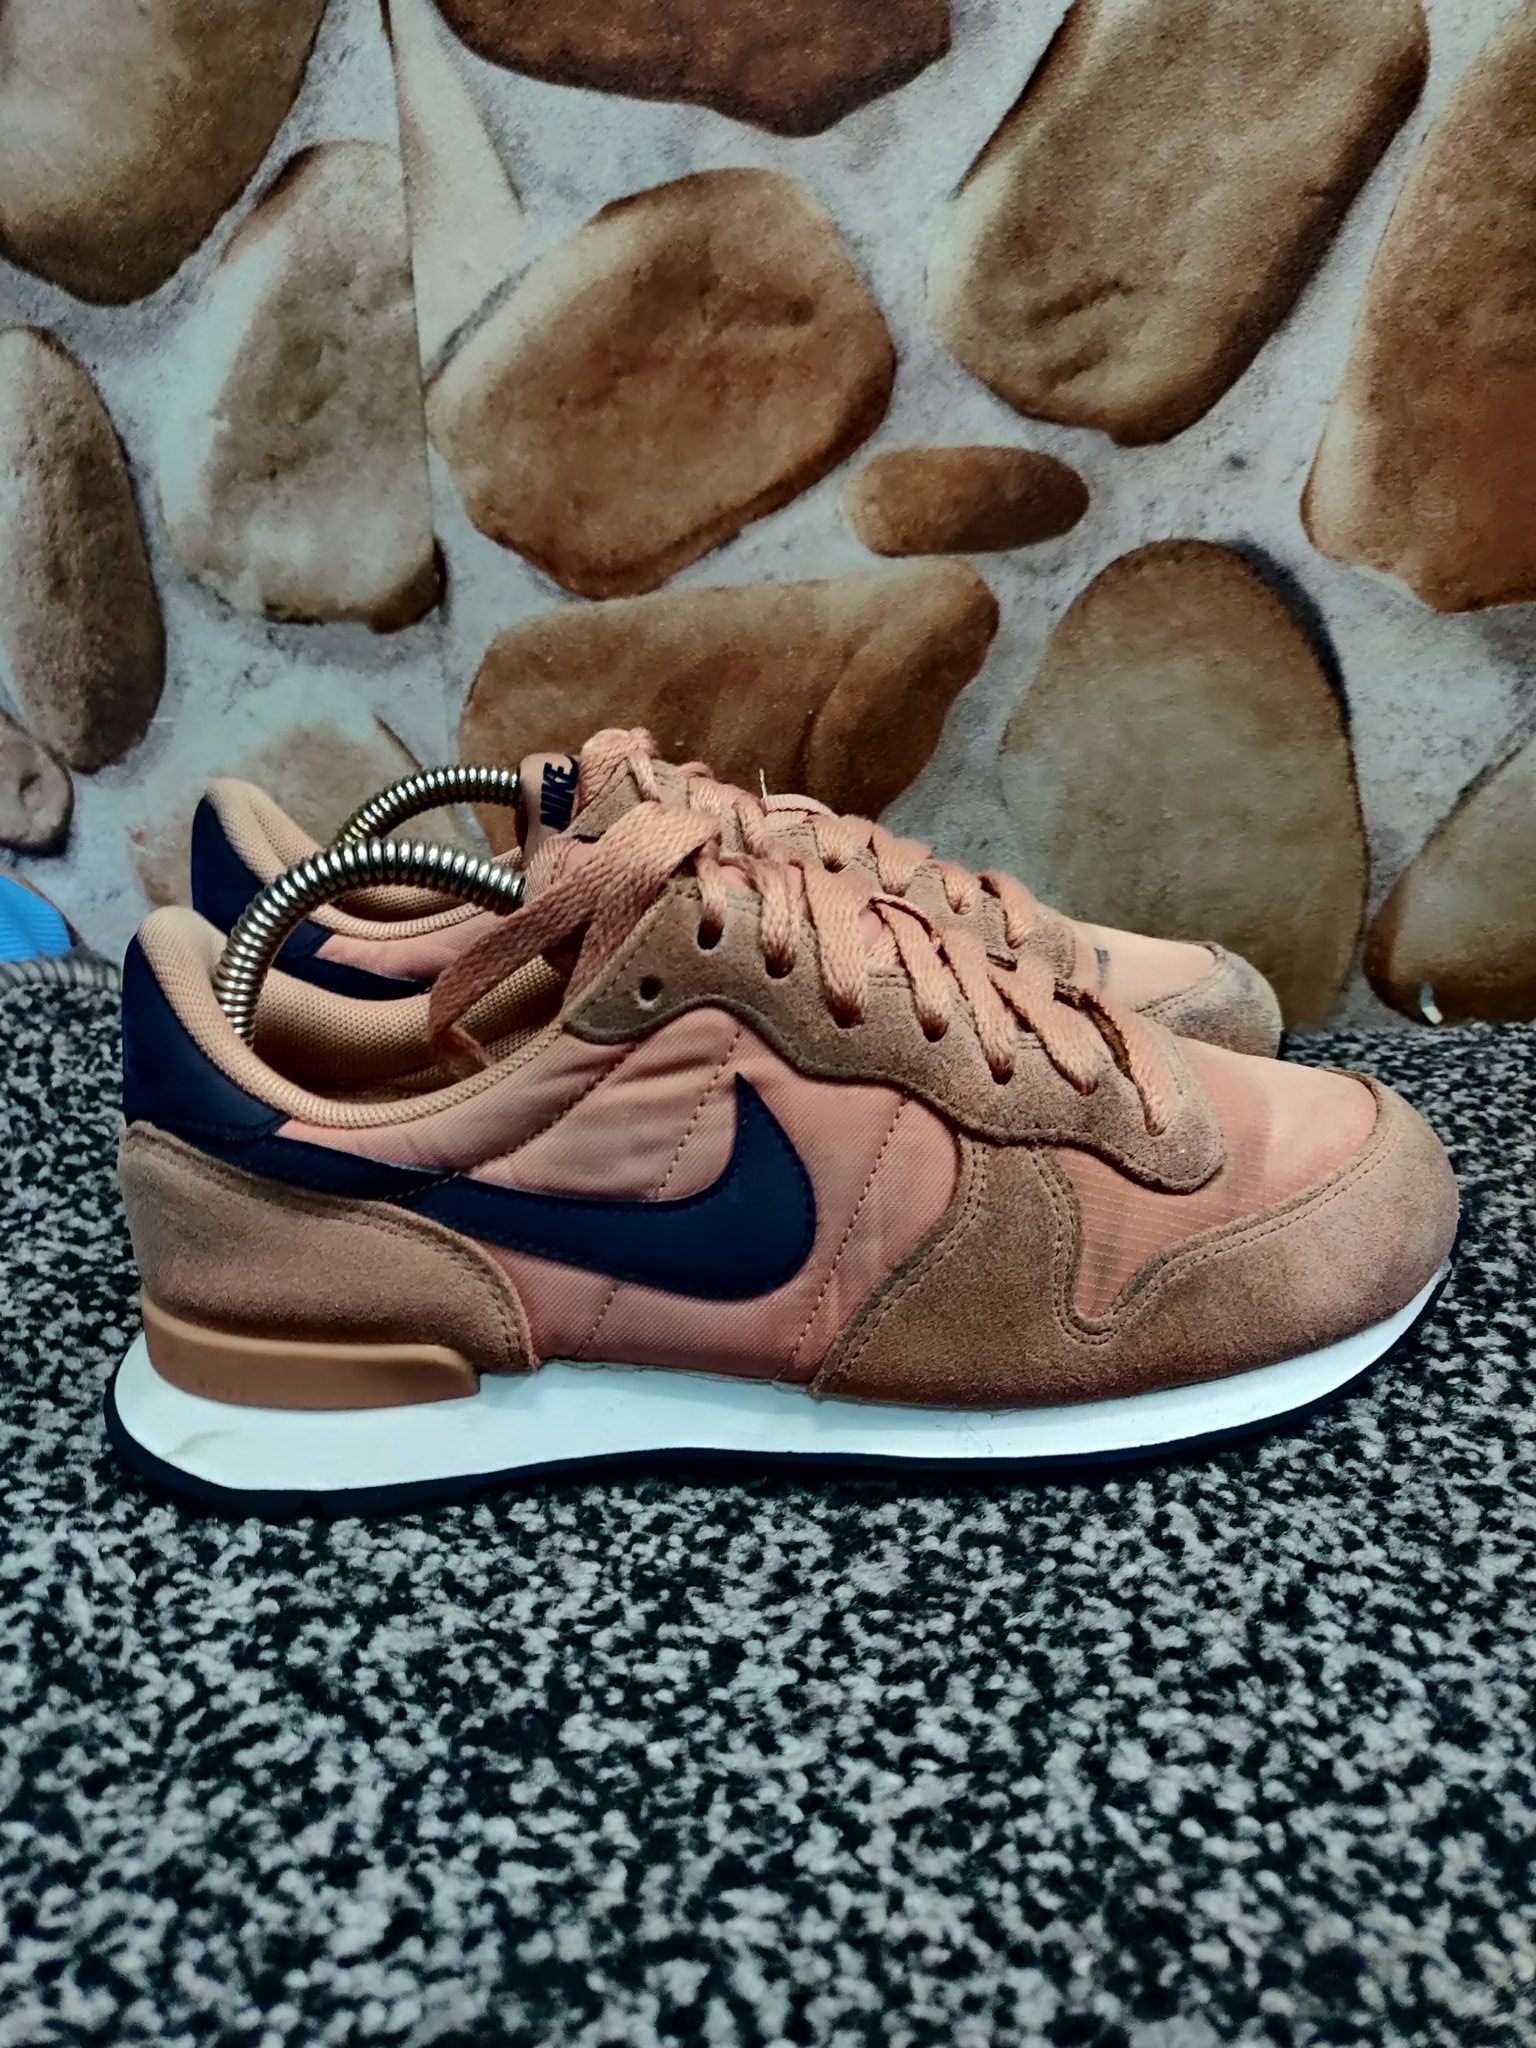 FwisaNation👟 on Twitter: "New Stock come grab a Mtumba Clean Pair Of Shoe Nike Internationalist UK 5 Puma Suede UK 6 Polo UK 7 Borg UK 7 DM/App/Call 0759495130 Price https://t.co/OFAX9ee21S" /